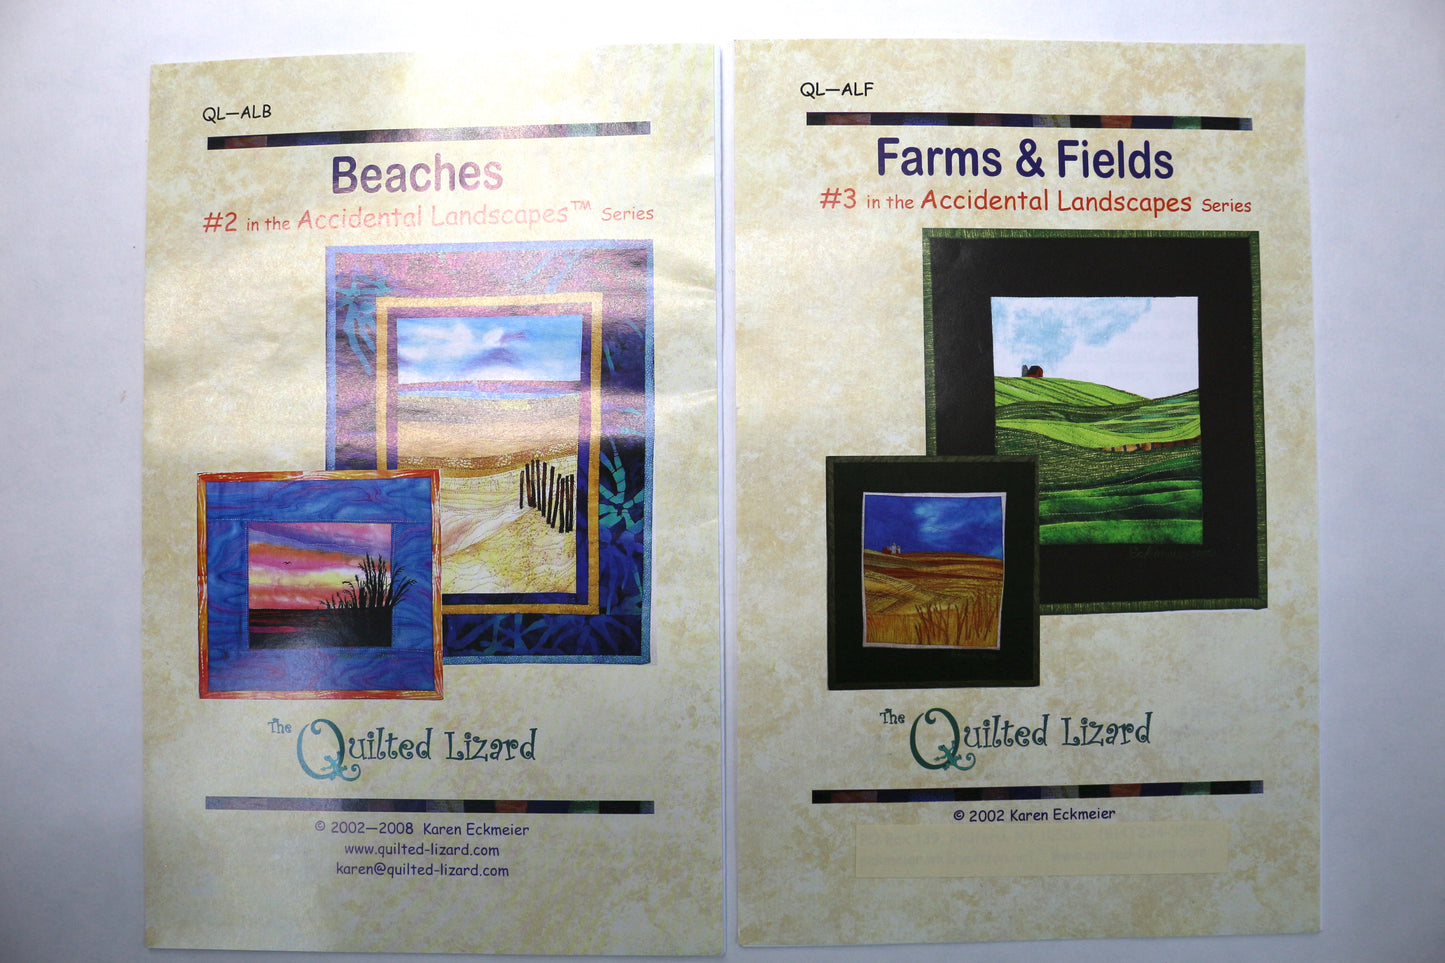 The Quilted Lizard Beaches Quilt Pattern or Farms & Fields Quilt Pattern